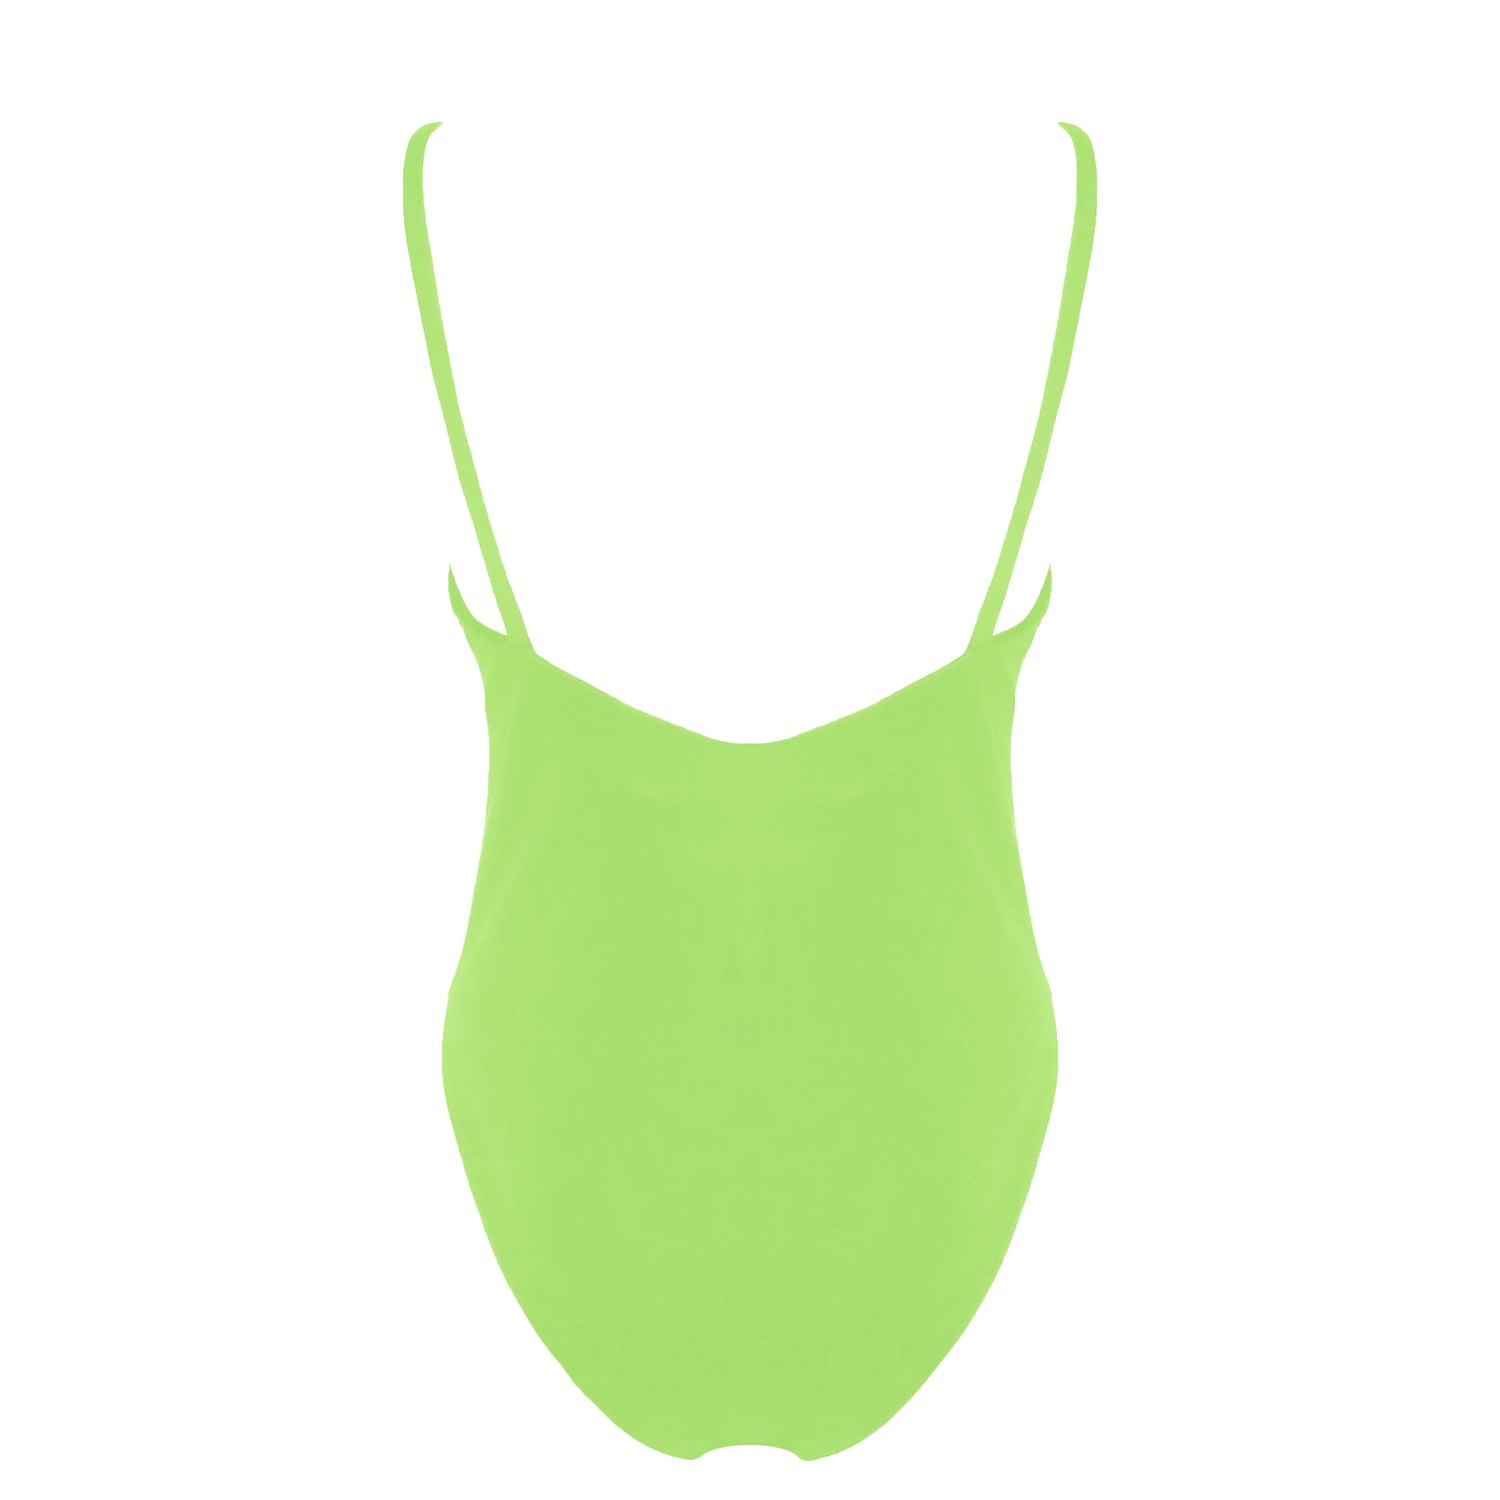 Back view of light neon green simplistic plunging v-neck one piece swimsuit with a low v-back, high cut legs and full coverage.